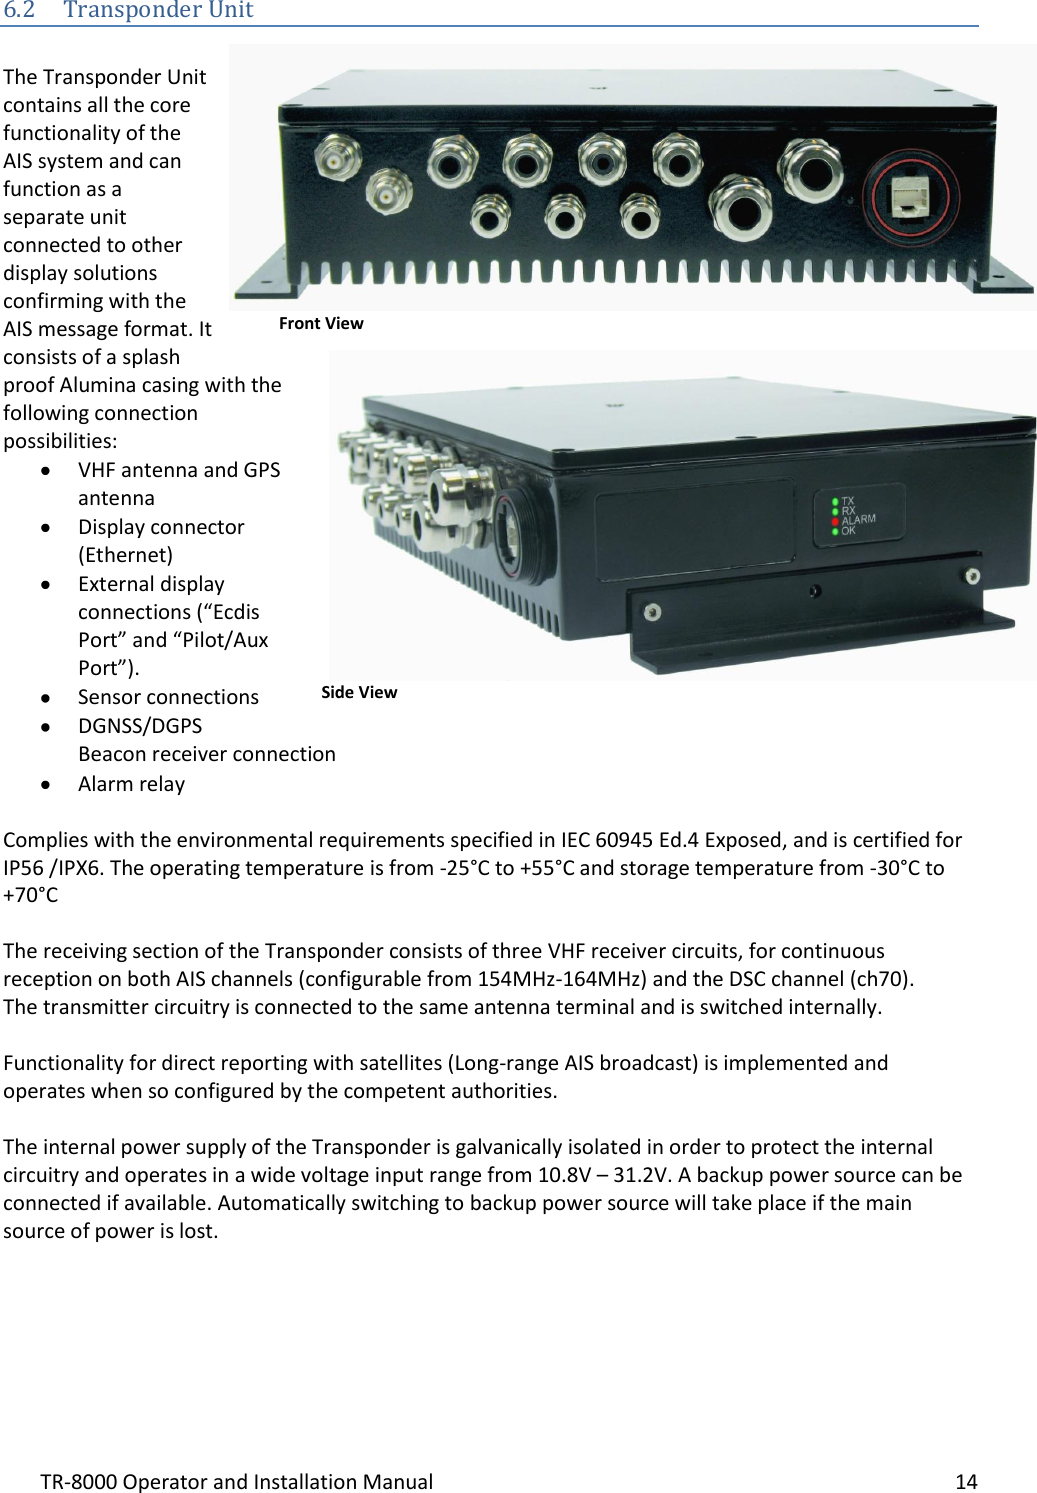 TR-8000 Operator and Installation Manual    14  6.2 Transponder Unit  The Transponder Unit contains all the core functionality of the AIS system and can function as a separate unit connected to other display solutions confirming with the AIS message format. It consists of a splash proof Alumina casing with the following connection possibilities:  VHF antenna and GPS antenna  Display connector (Ethernet)  External display connections (“Ecdis Port” and “Pilot/Aux Port”).  Sensor connections  DGNSS/DGPS Beacon receiver connection  Alarm relay  Complies with the environmental requirements specified in IEC 60945 Ed.4 Exposed, and is certified for IP56 /IPX6. The operating temperature is from -25°C to +55°C and storage temperature from -30°C to +70°C  The receiving section of the Transponder consists of three VHF receiver circuits, for continuous reception on both AIS channels (configurable from 154MHz-164MHz) and the DSC channel (ch70).  The transmitter circuitry is connected to the same antenna terminal and is switched internally.   Functionality for direct reporting with satellites (Long-range AIS broadcast) is implemented and operates when so configured by the competent authorities.  The internal power supply of the Transponder is galvanically isolated in order to protect the internal circuitry and operates in a wide voltage input range from 10.8V – 31.2V. A backup power source can be connected if available. Automatically switching to backup power source will take place if the main source of power is lost.      Front View Side View 